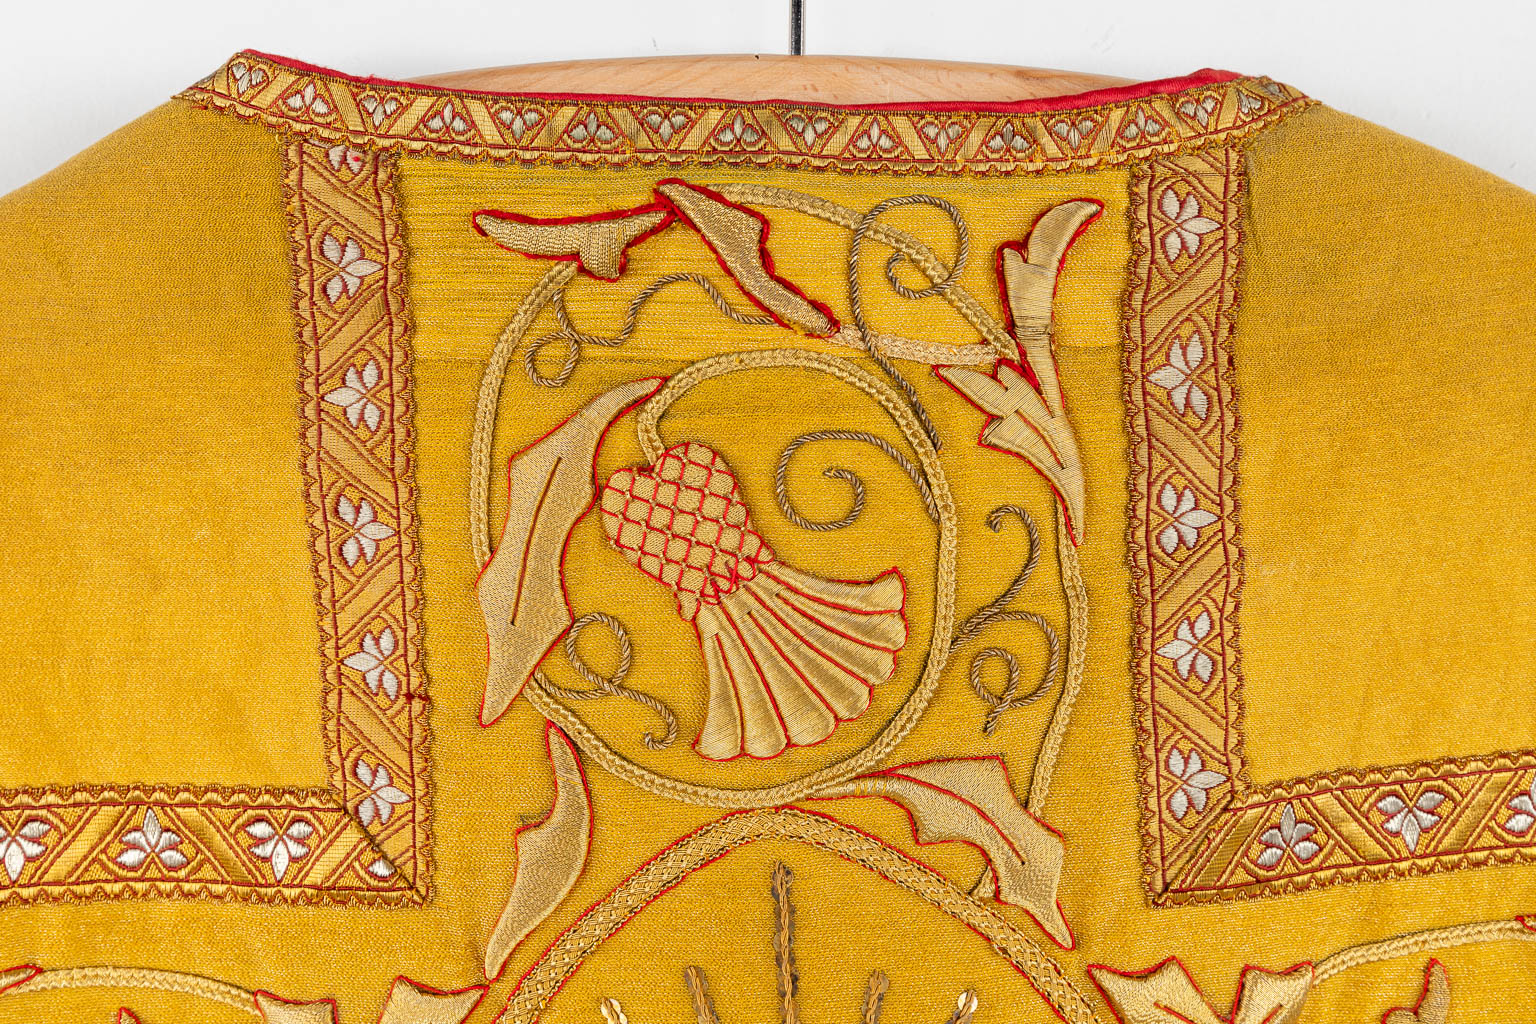 Two Dalmatics, Roman Chasuble, Chalice Veil and Stola, thick gold thread embroideries with floral decor.